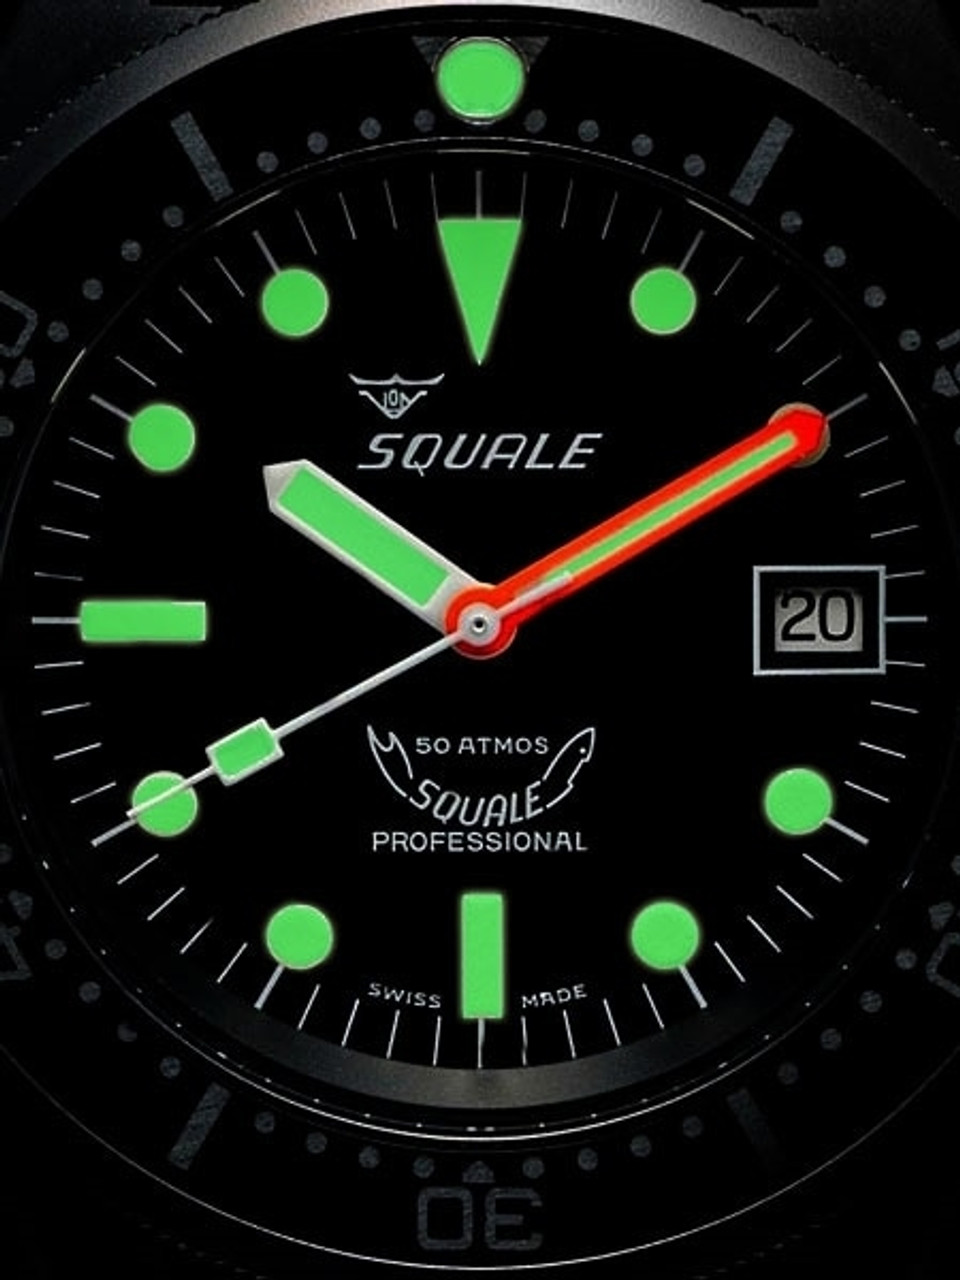 Squale 500 meter Professional Swiss Automatic Dive watch with Sapphire  Crystal #1521-026PVD